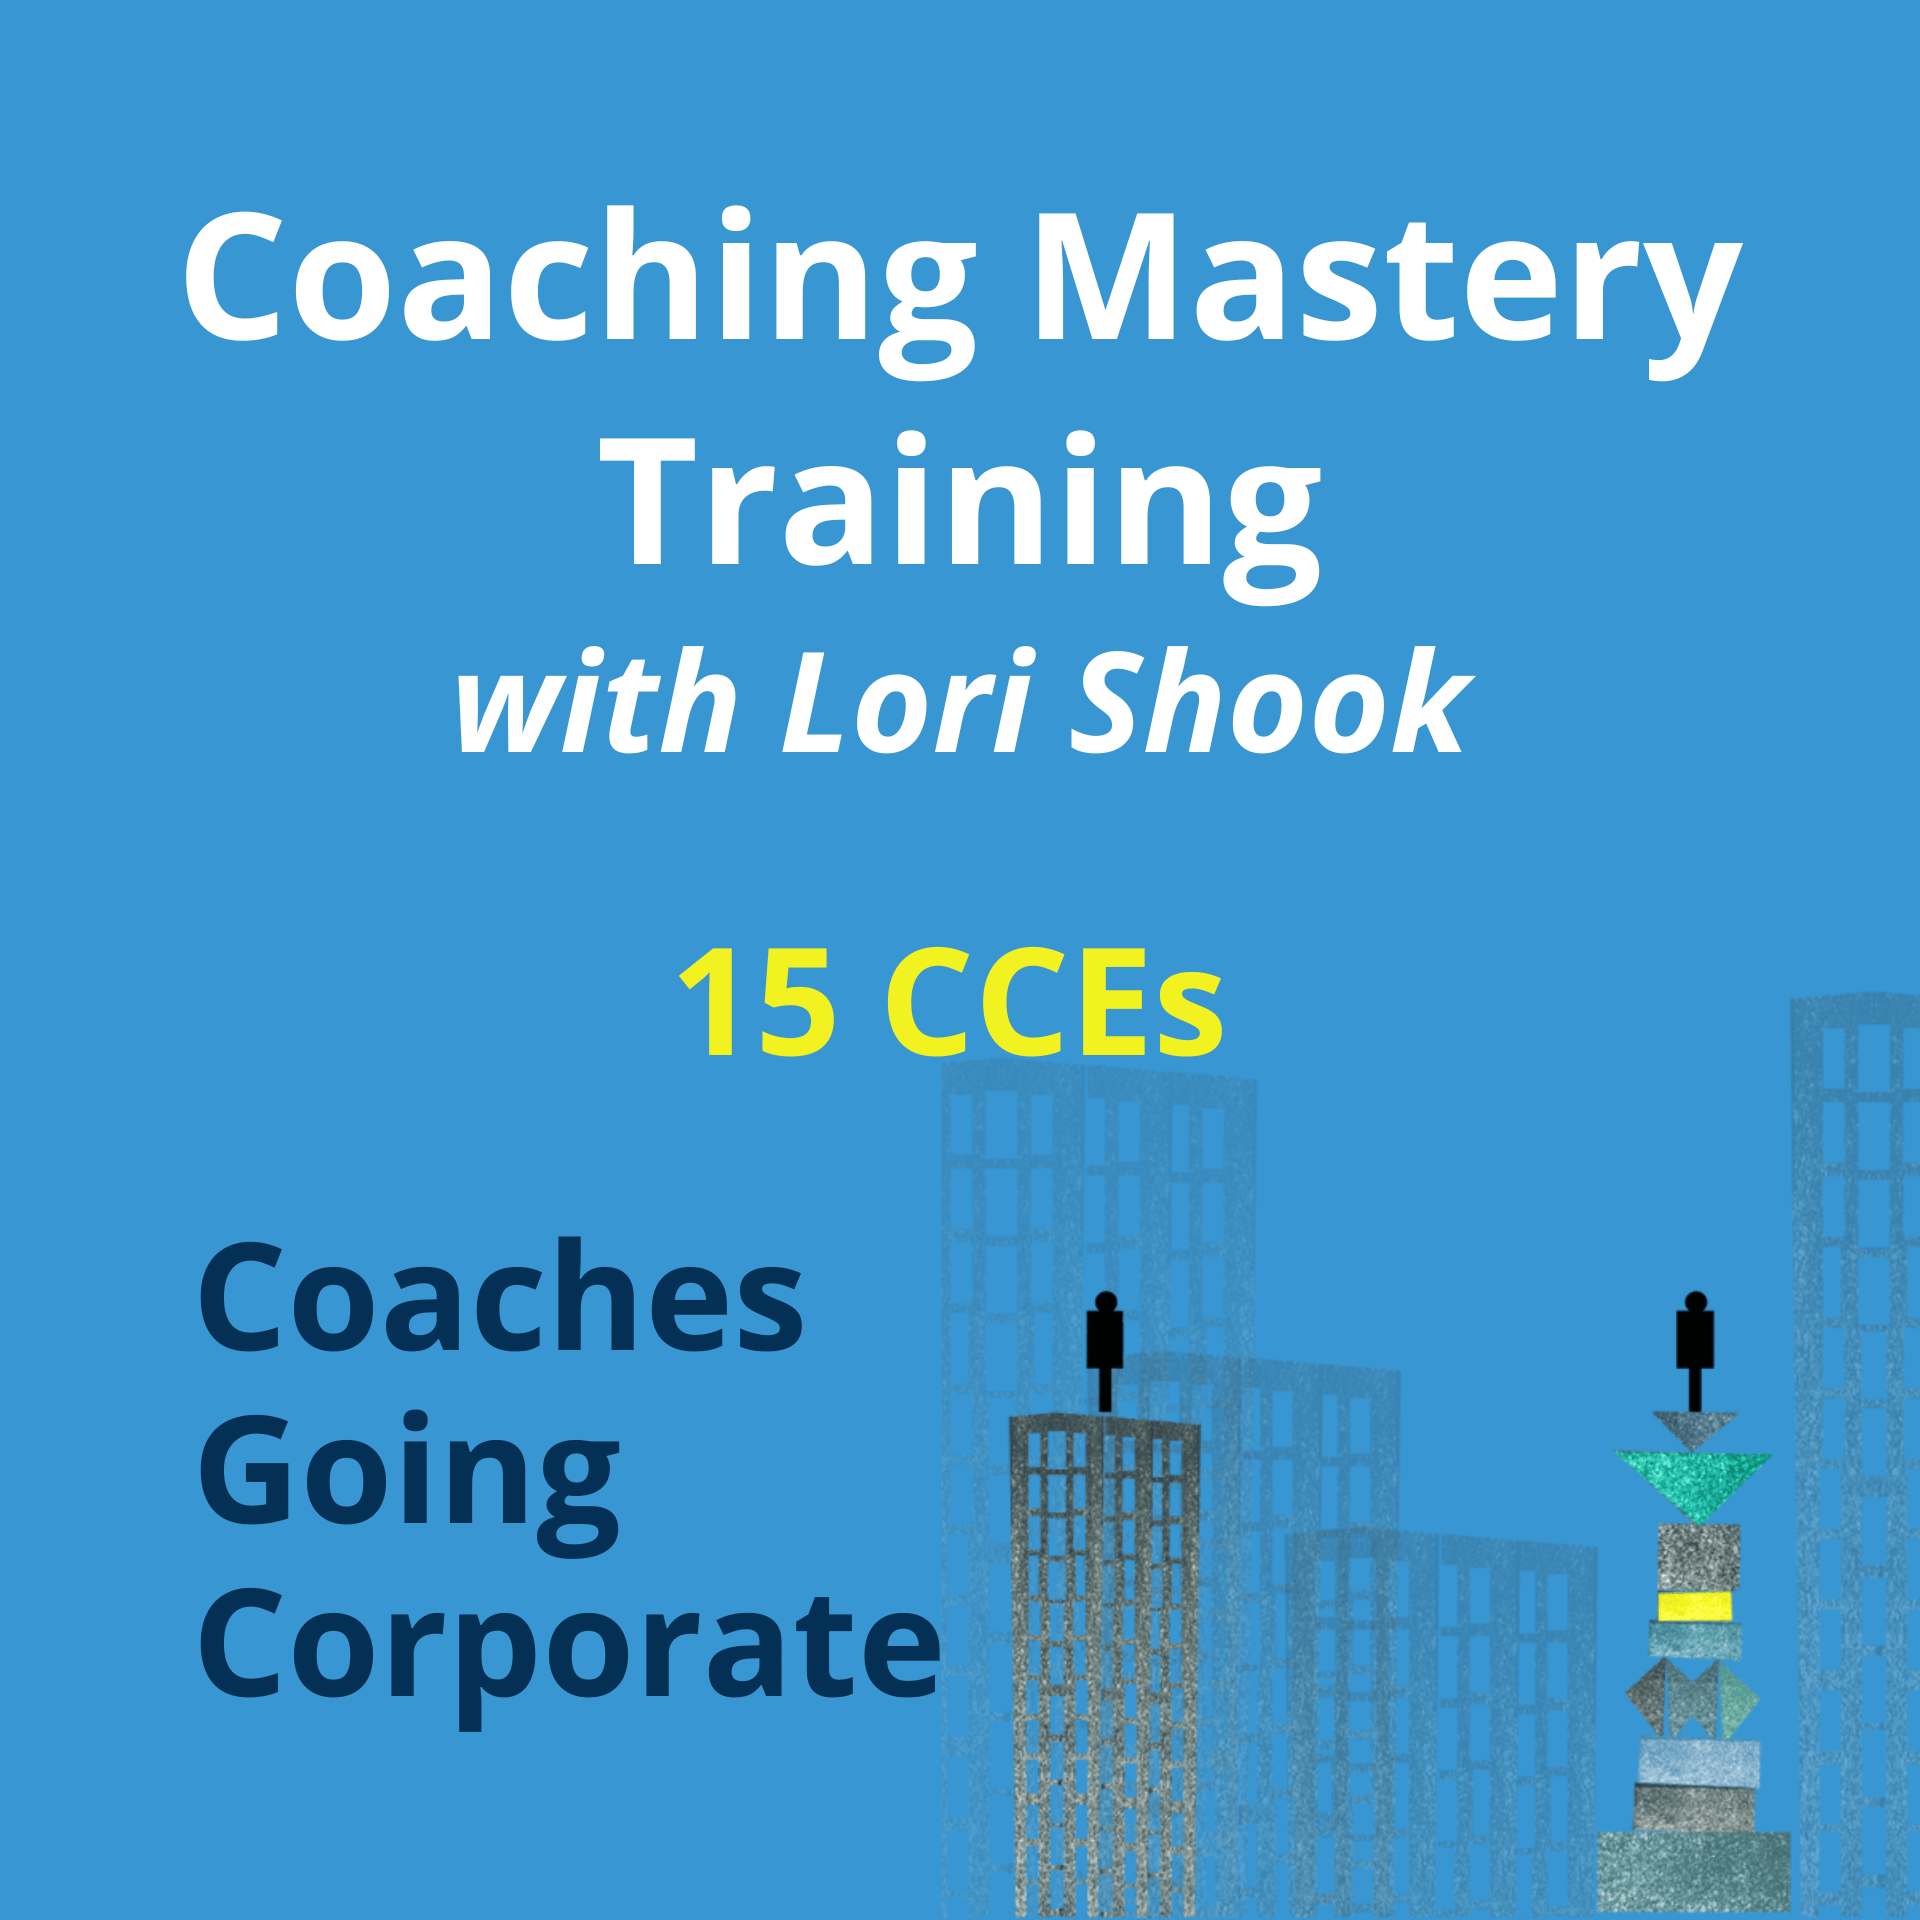 Want to take your coaching to the next level?  